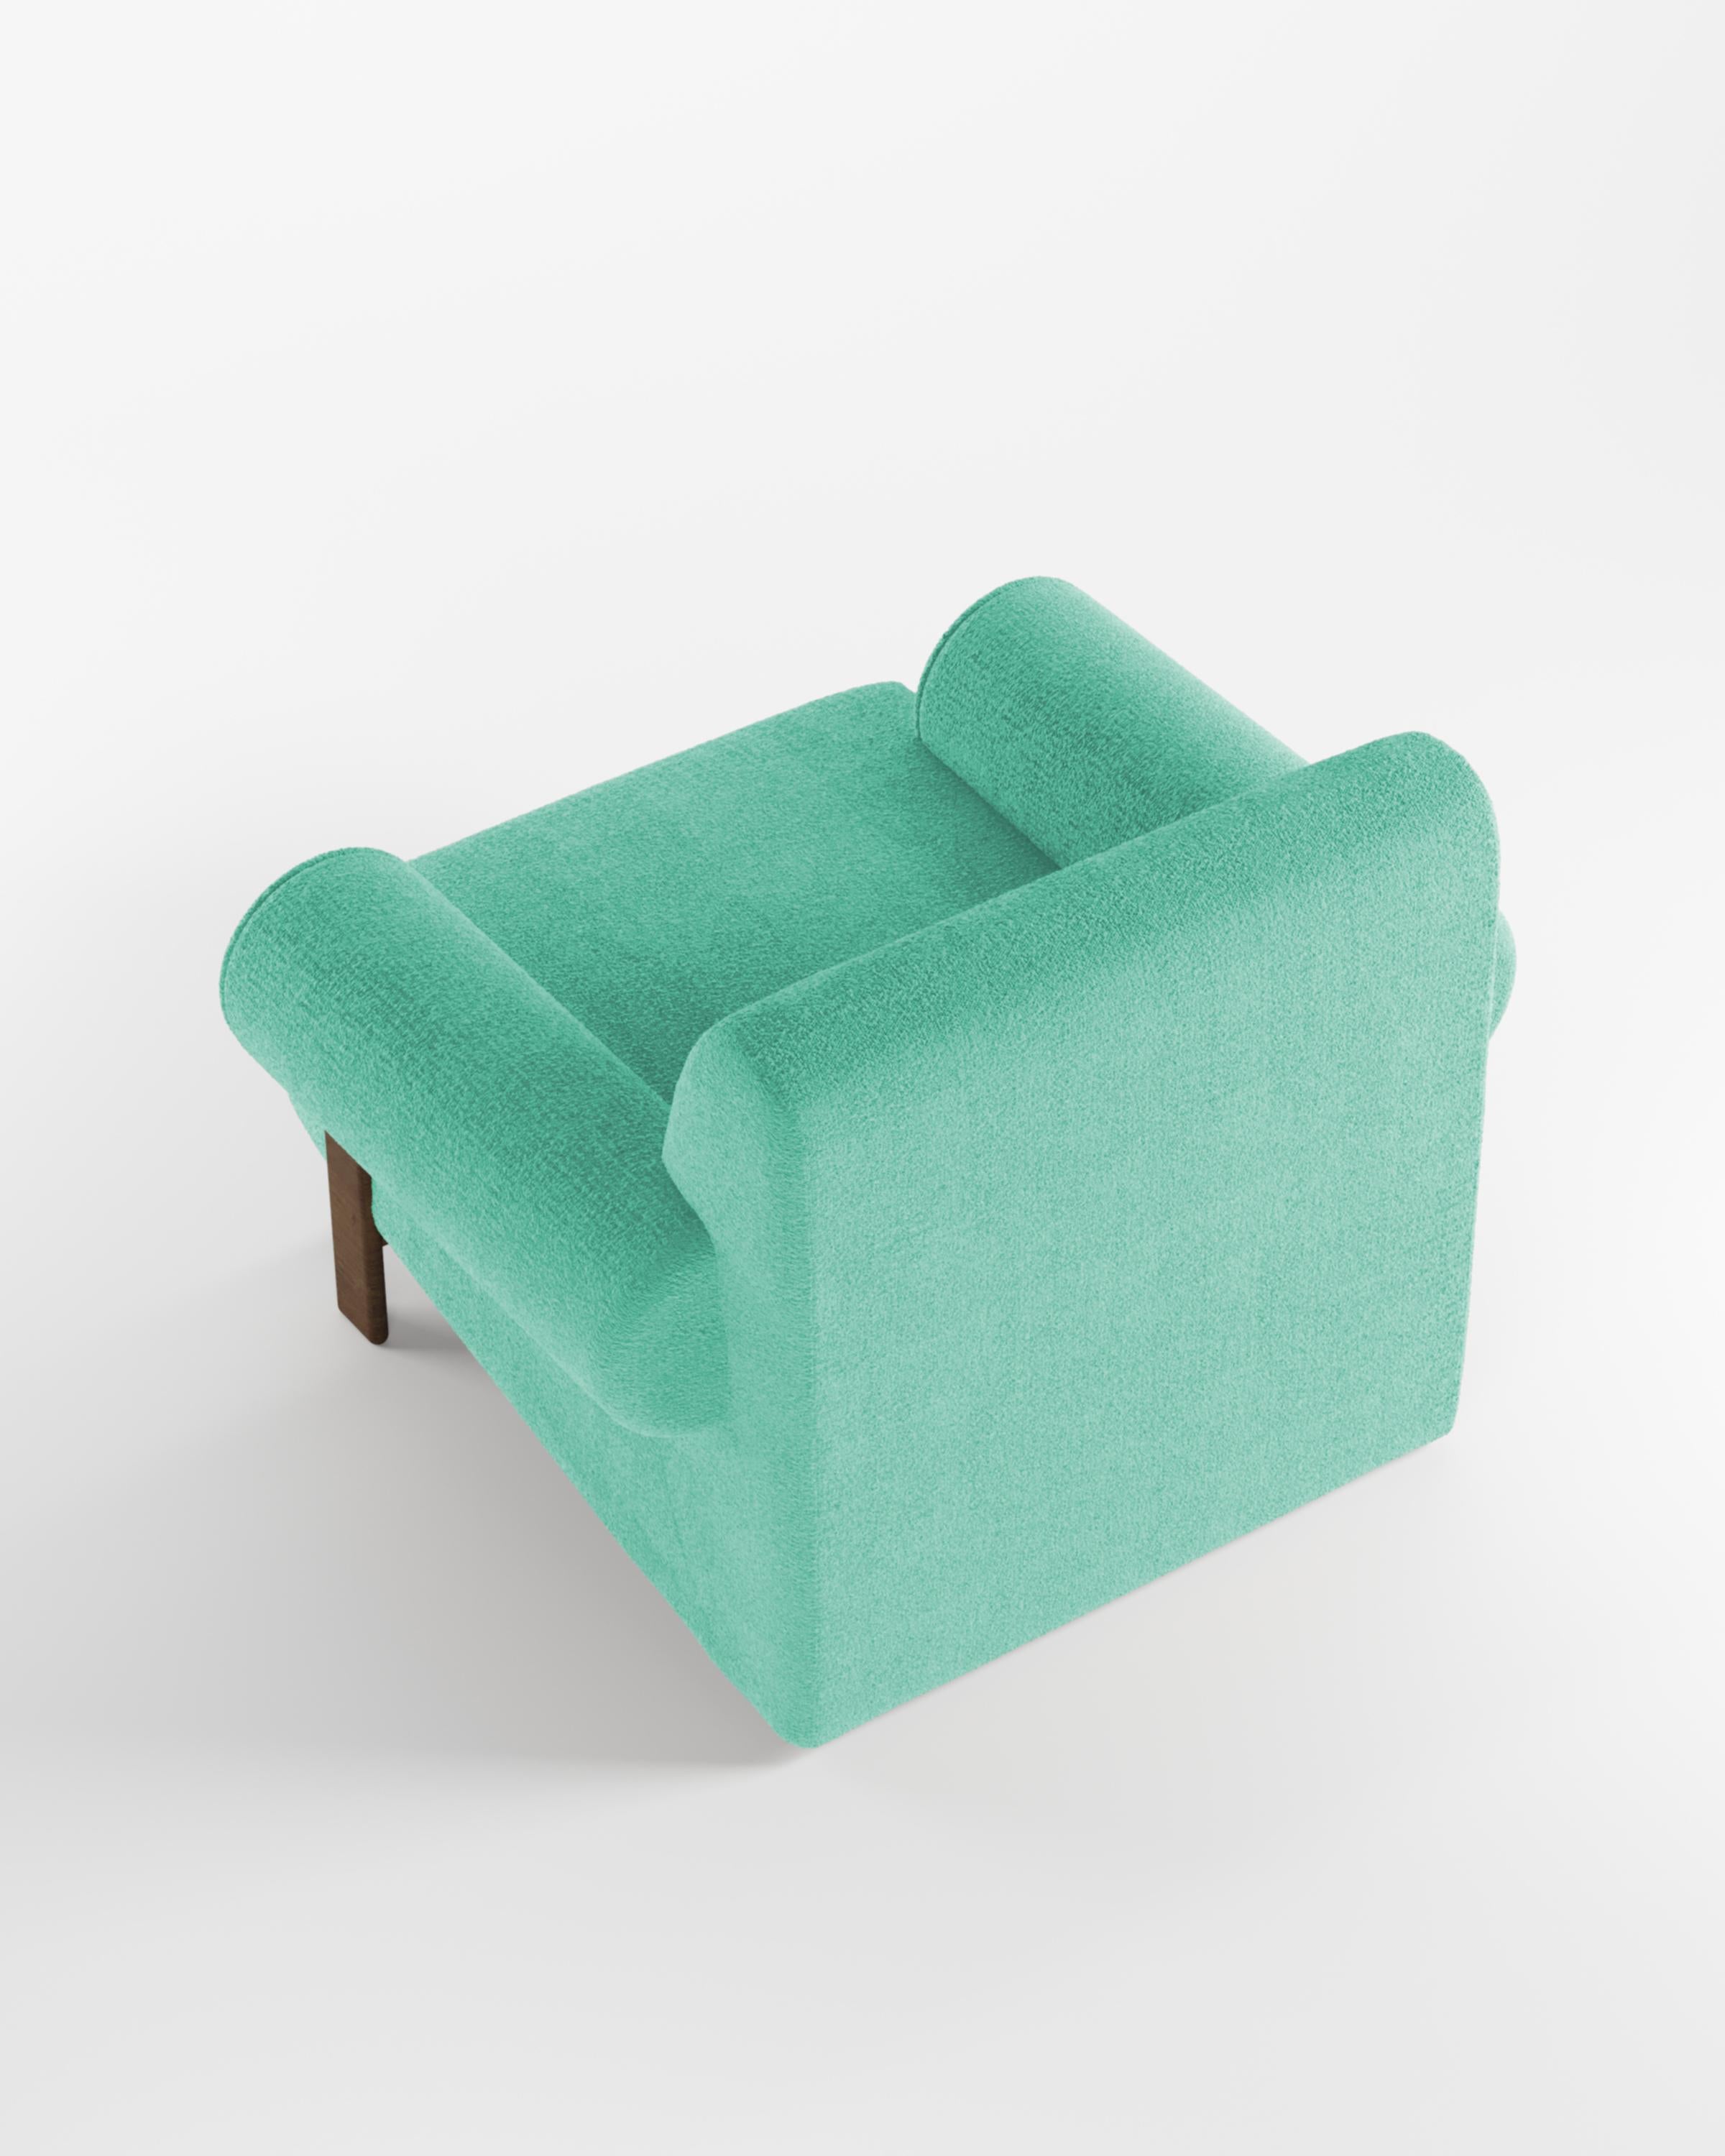 Fabric Contemporary Modern Paloma Armchair in Bouclé Teal by Collector For Sale